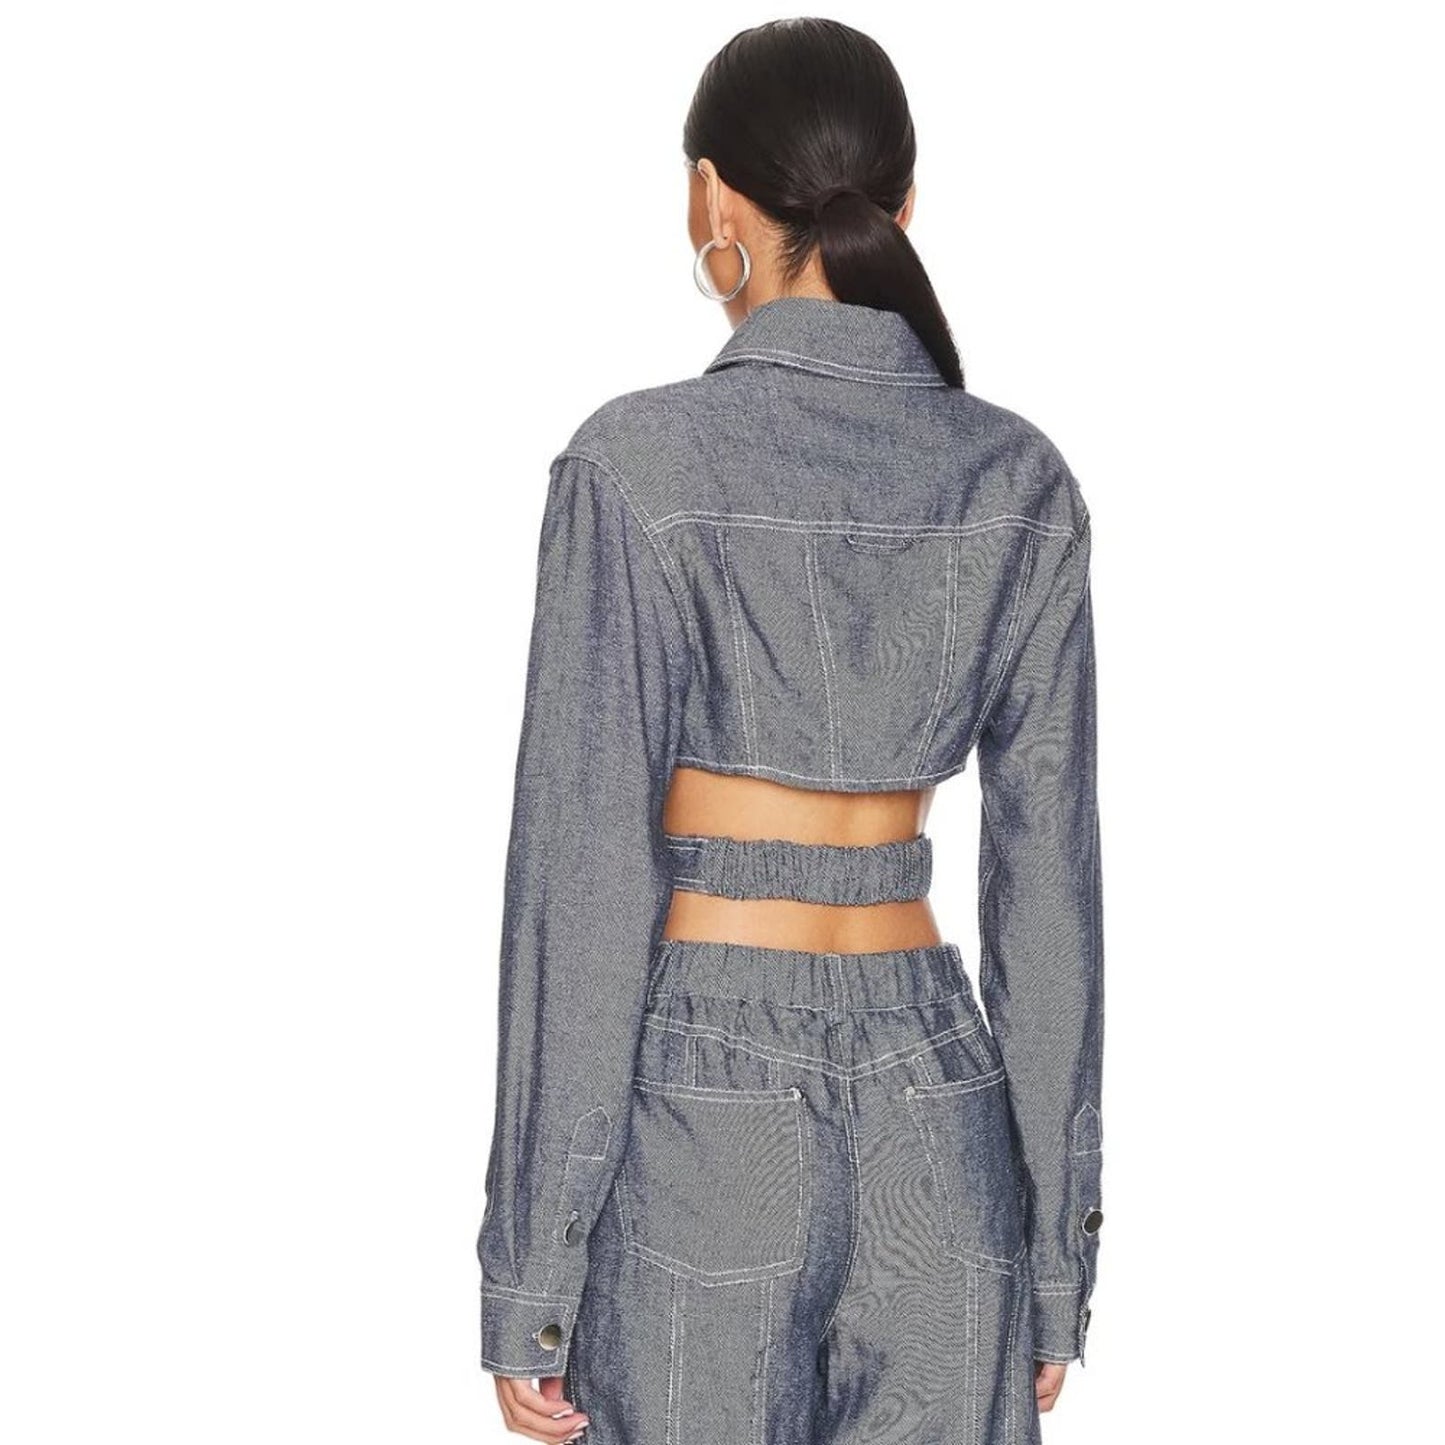 H:ours Altagracia Crop Jacket in Blue Grey NWOT Size Small